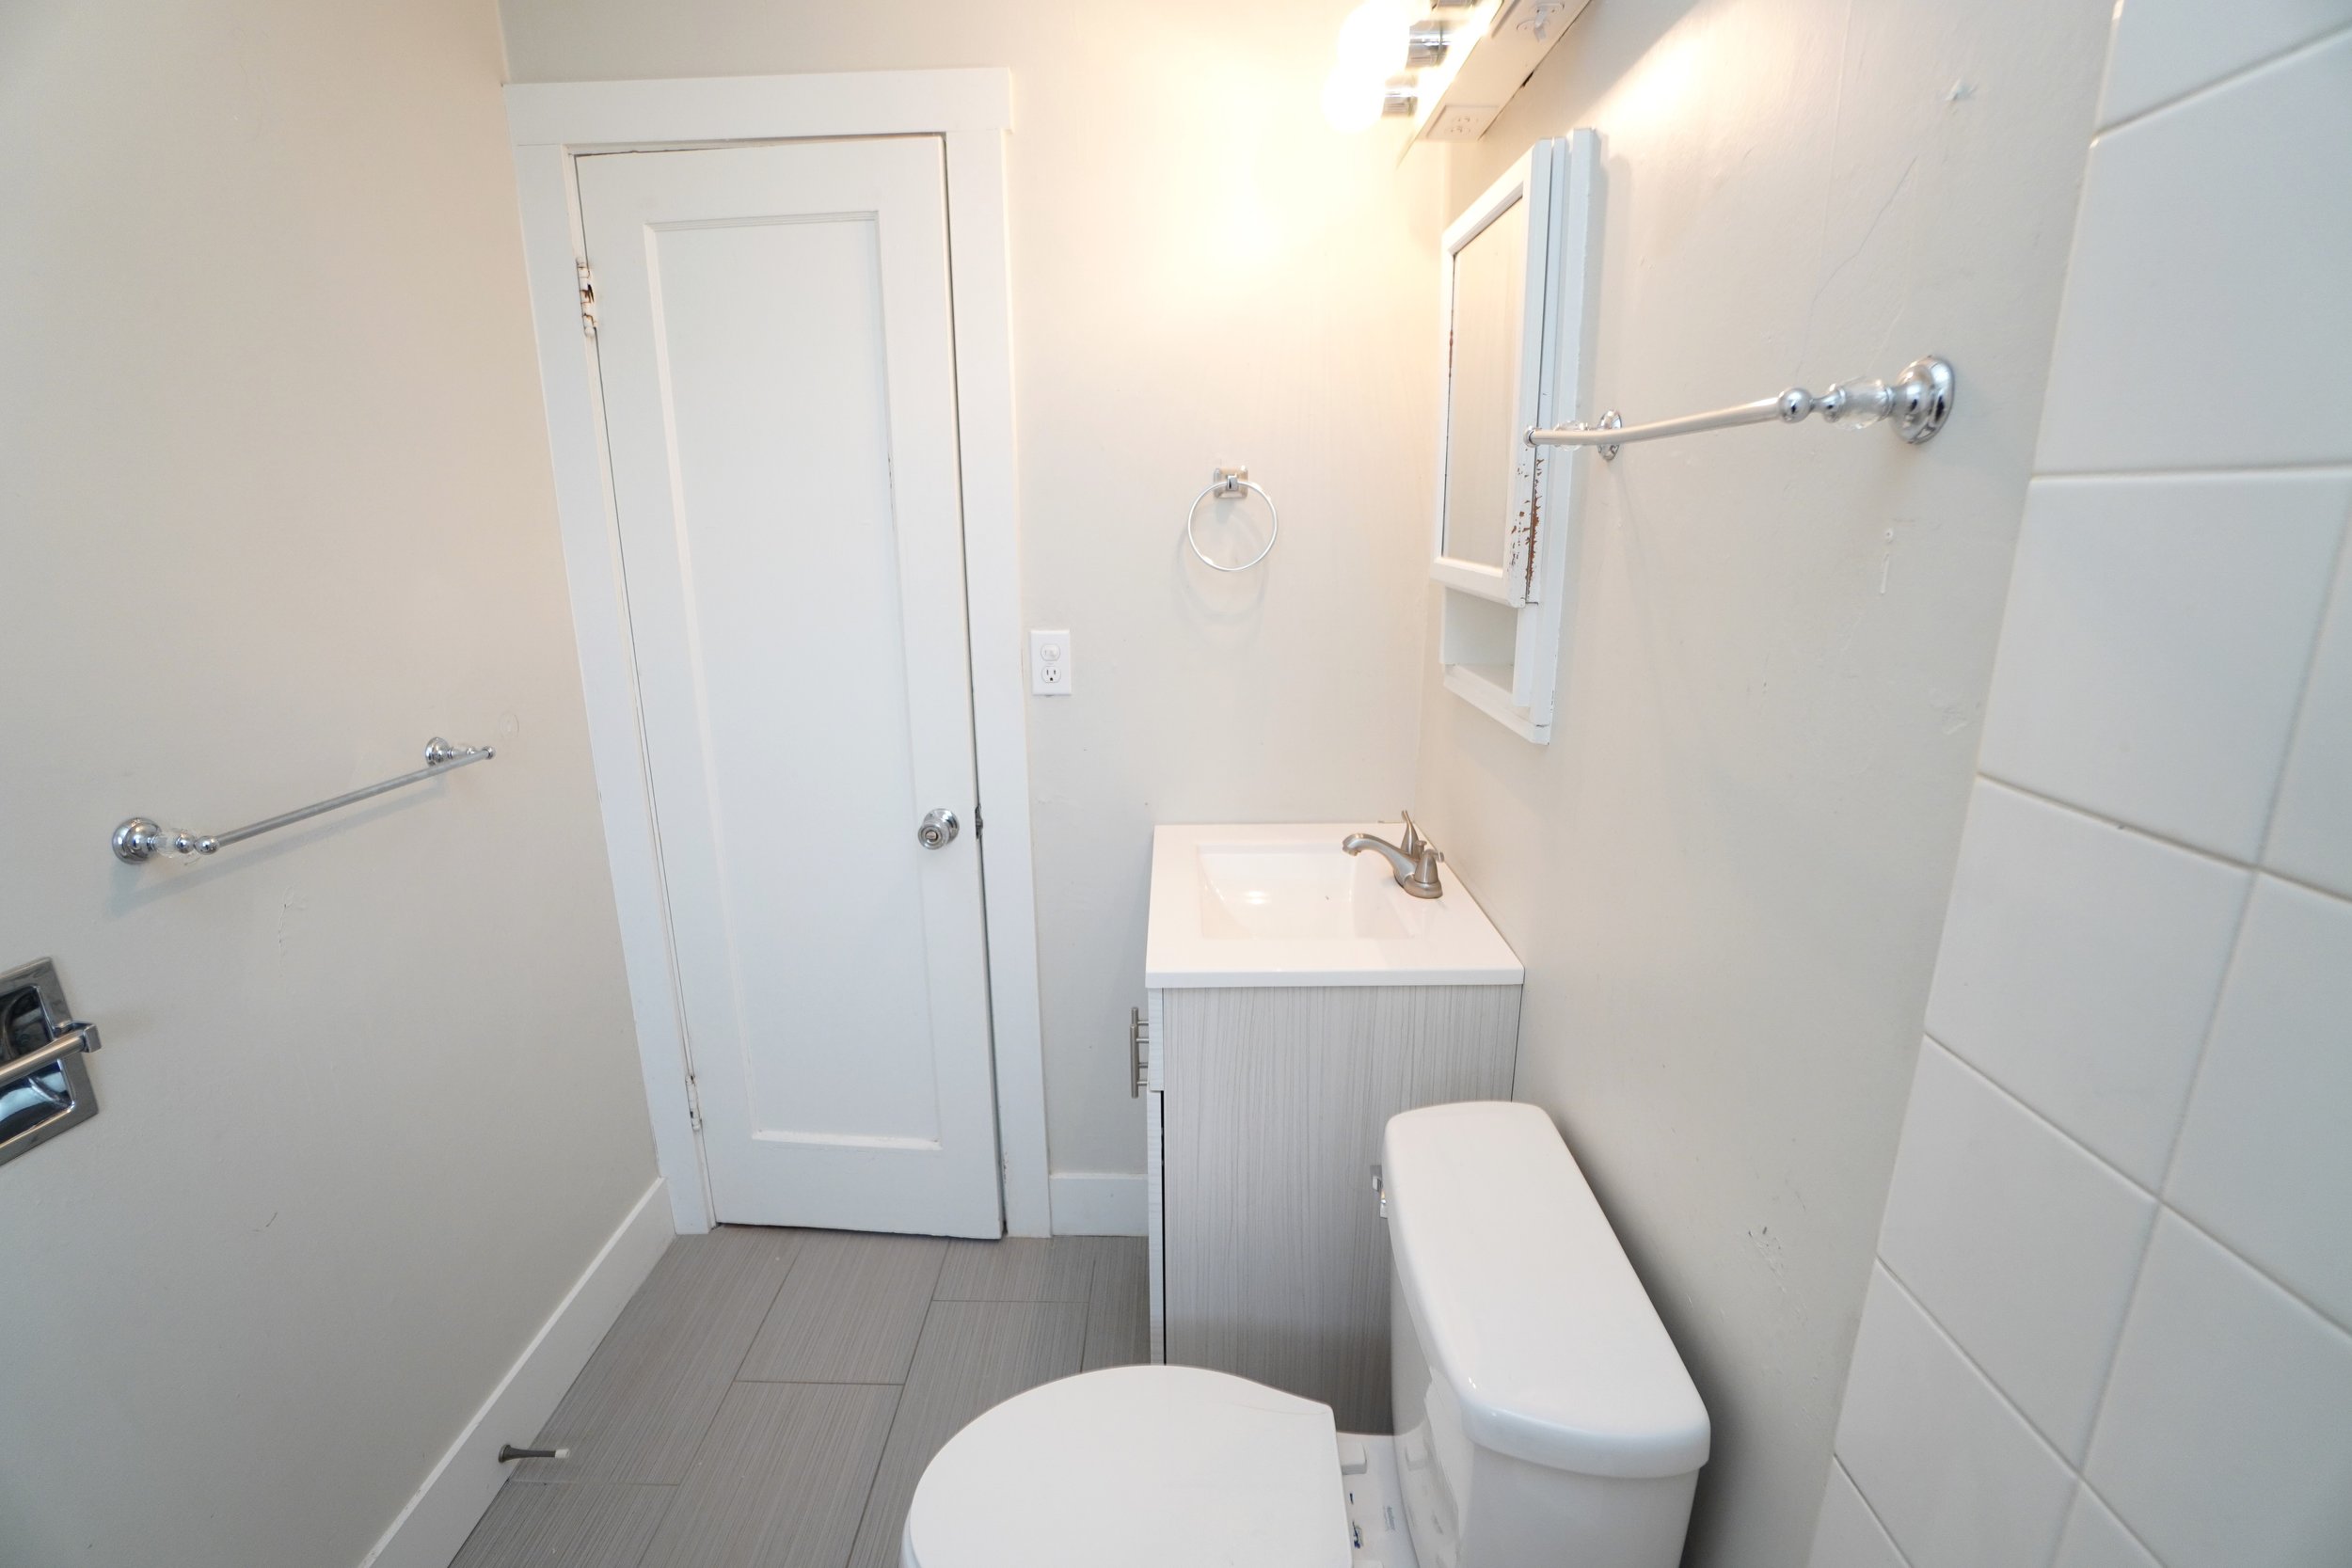 bathroom from other side.JPG